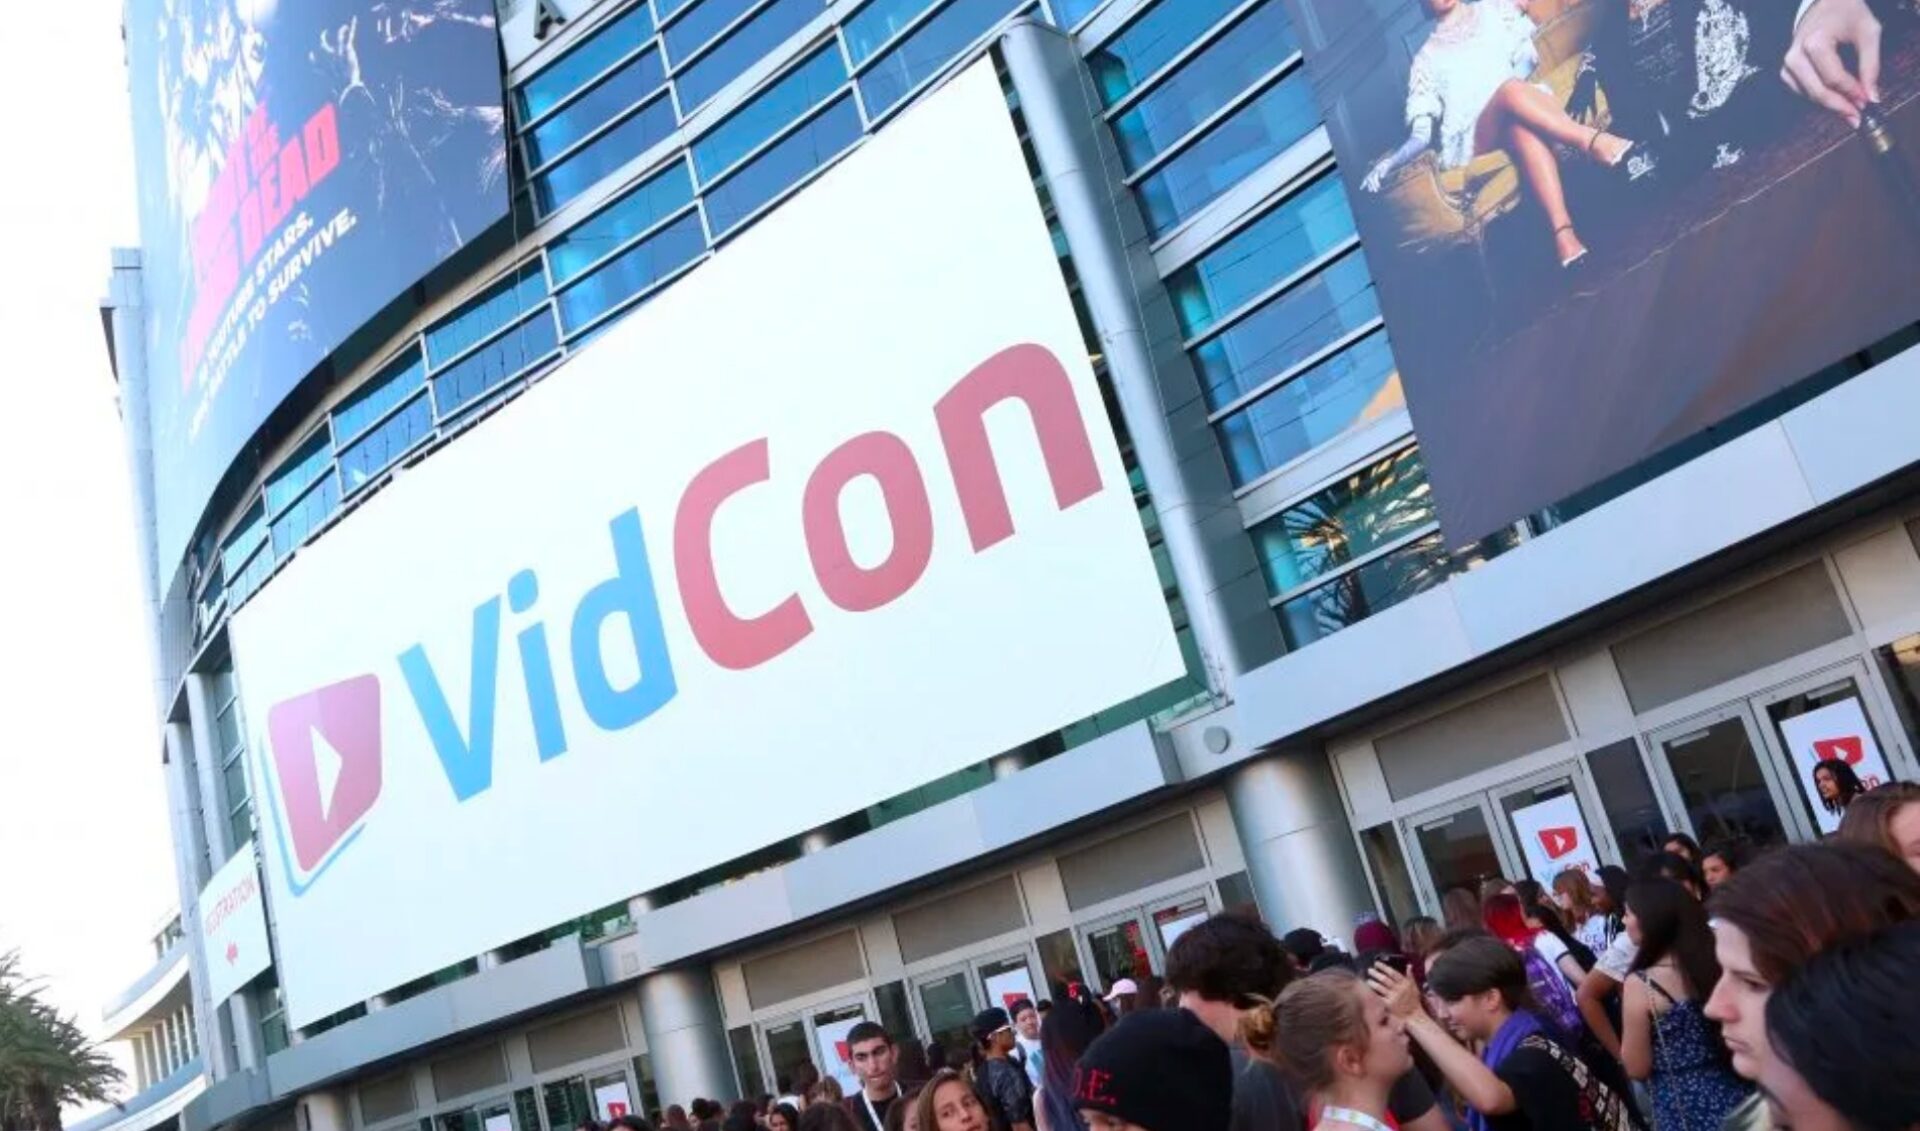 VidCon has revealed the title sponsor for its 2023 Anaheim event